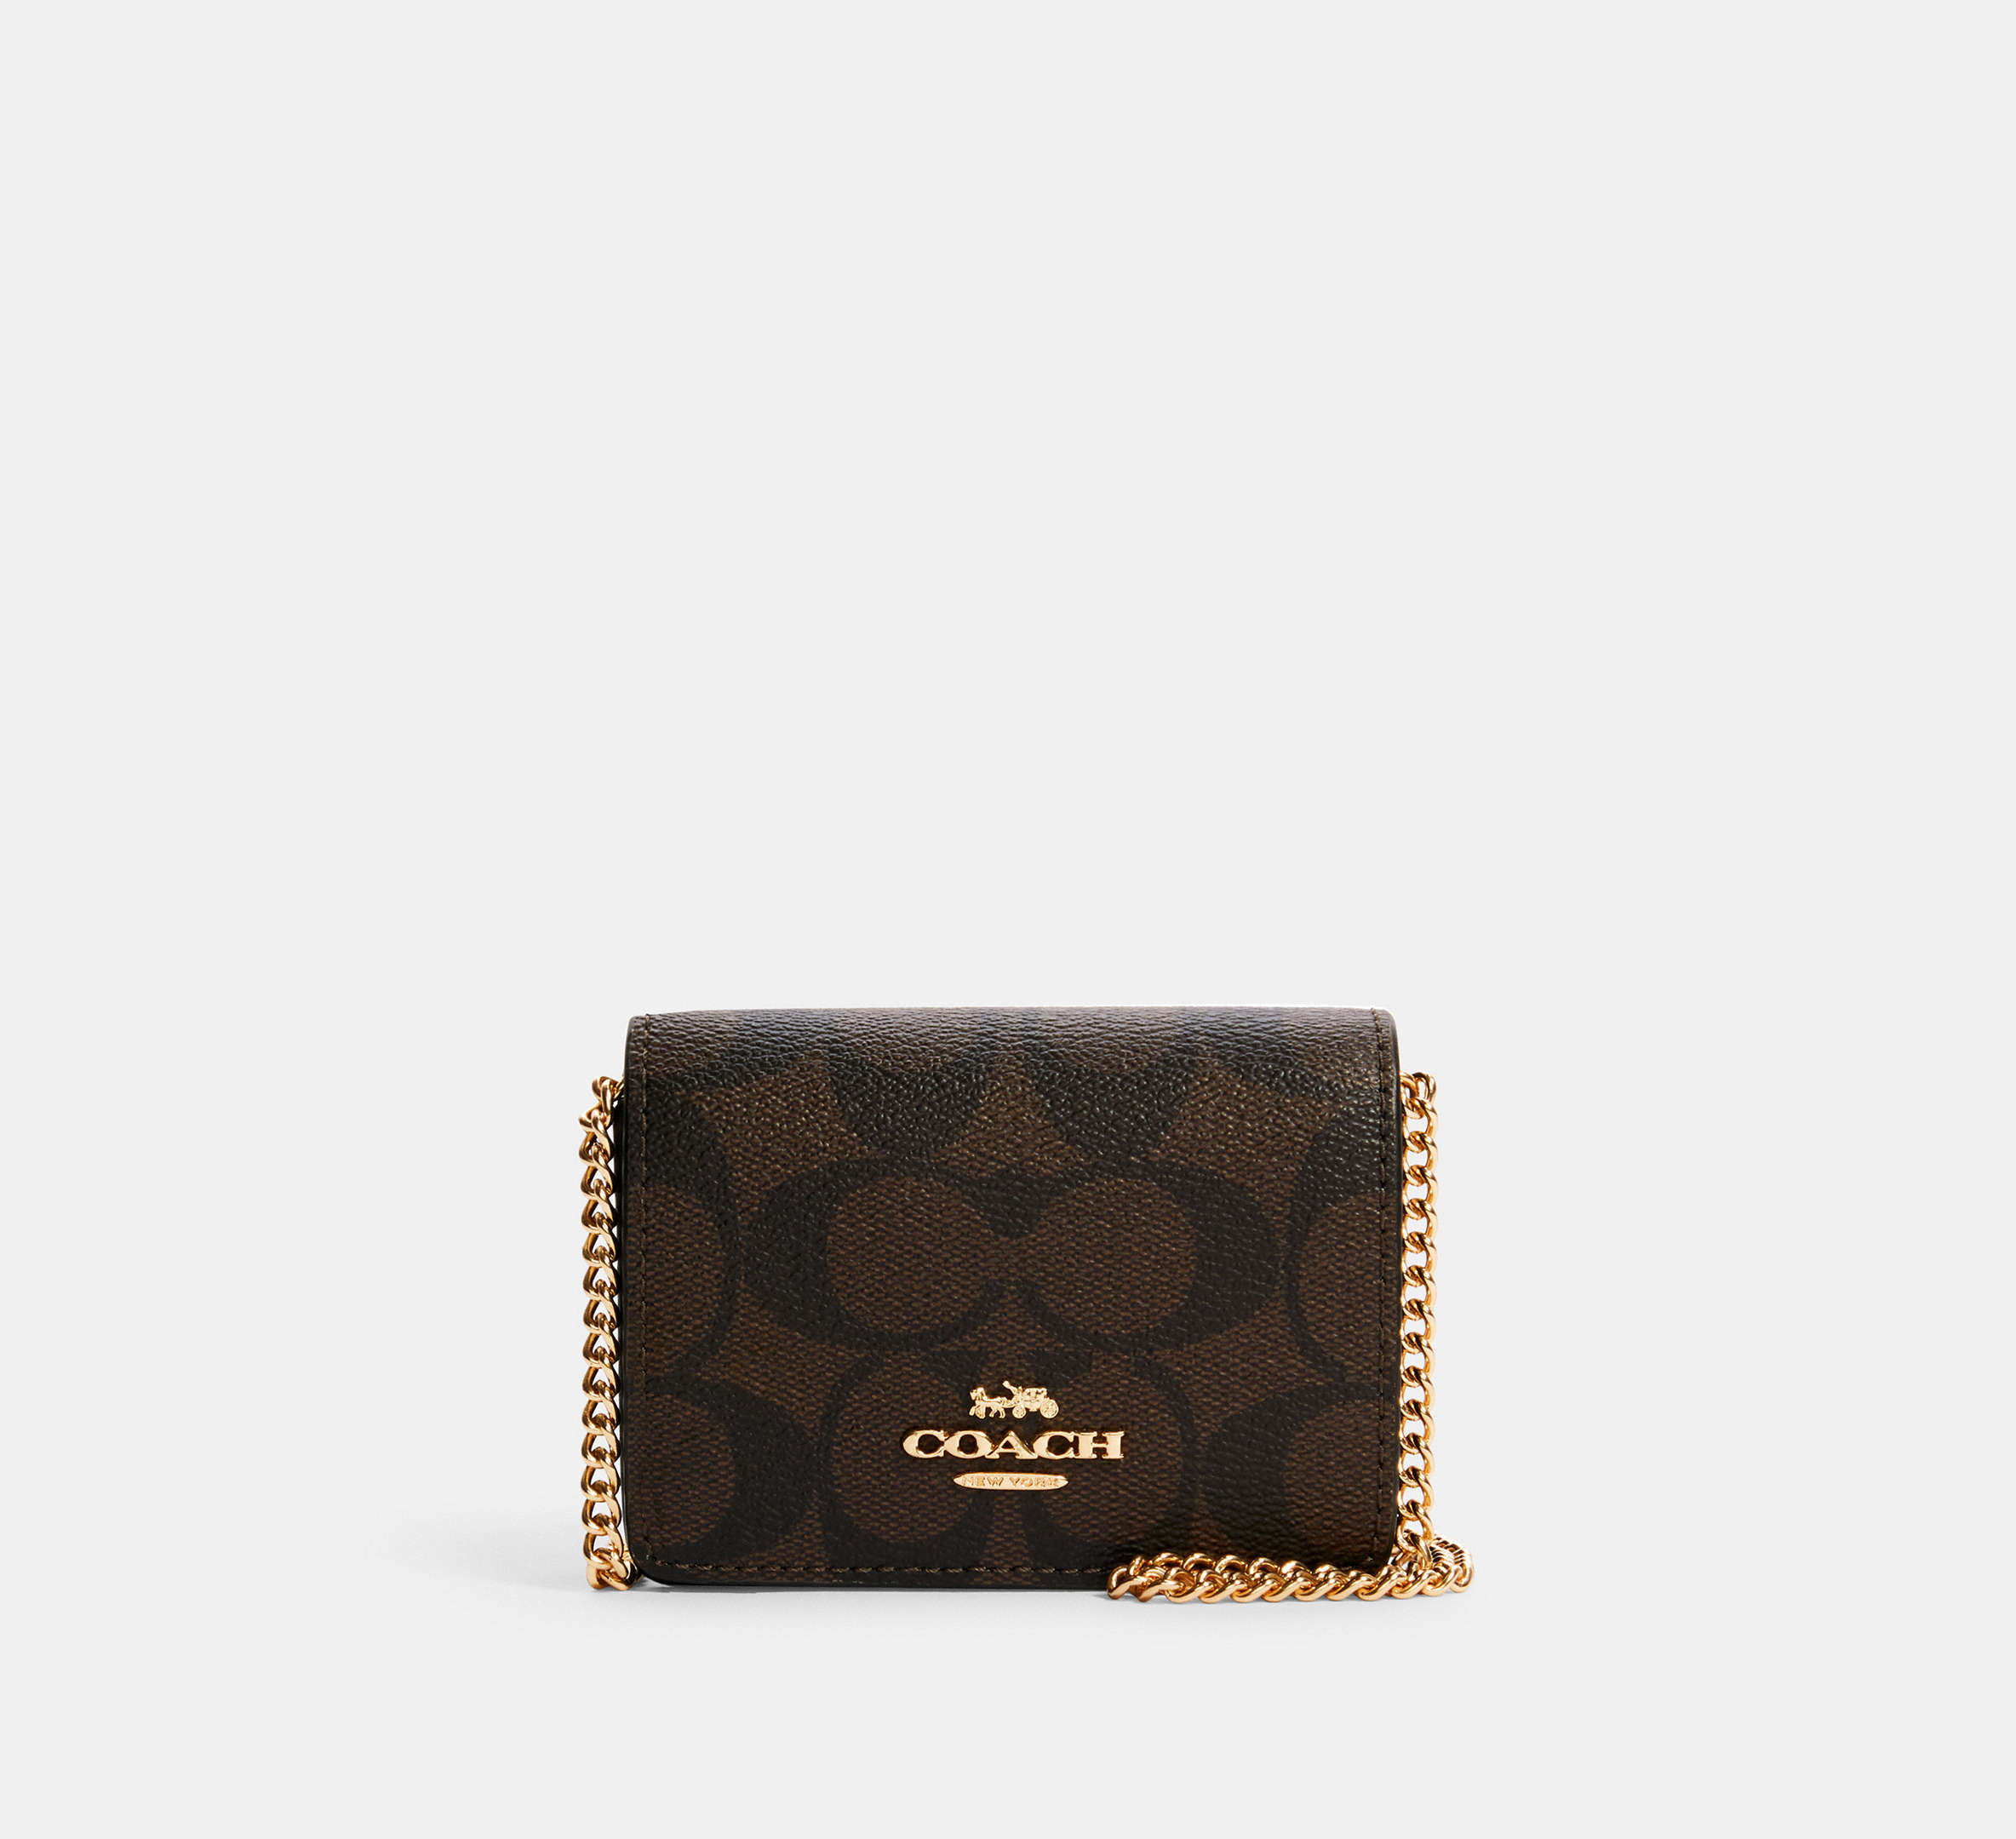 Coach: Mini Wallet On A Chain In Signature Canvas $51.20 (60% off)